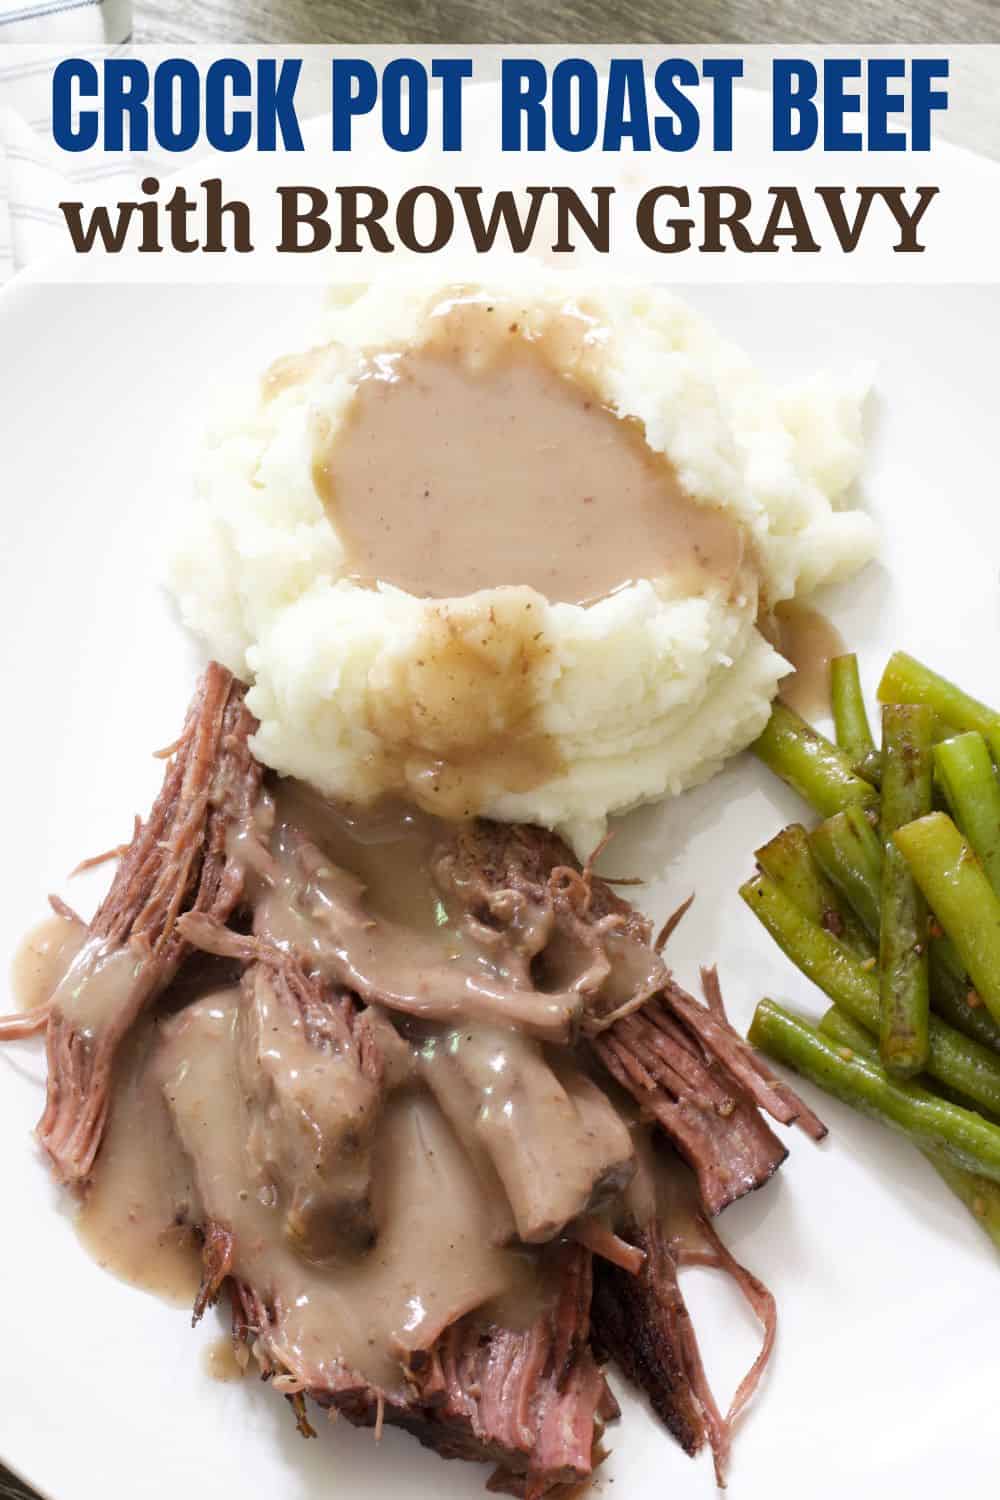 Crock Pot Roast Beef & Brown Gravy (without Lipton soup) is so tender it melts in your mouth and the silky gravy is so easy to make. #roastbeef #crockpot #slowcooker #comfortfood via @mindyscookingobsession